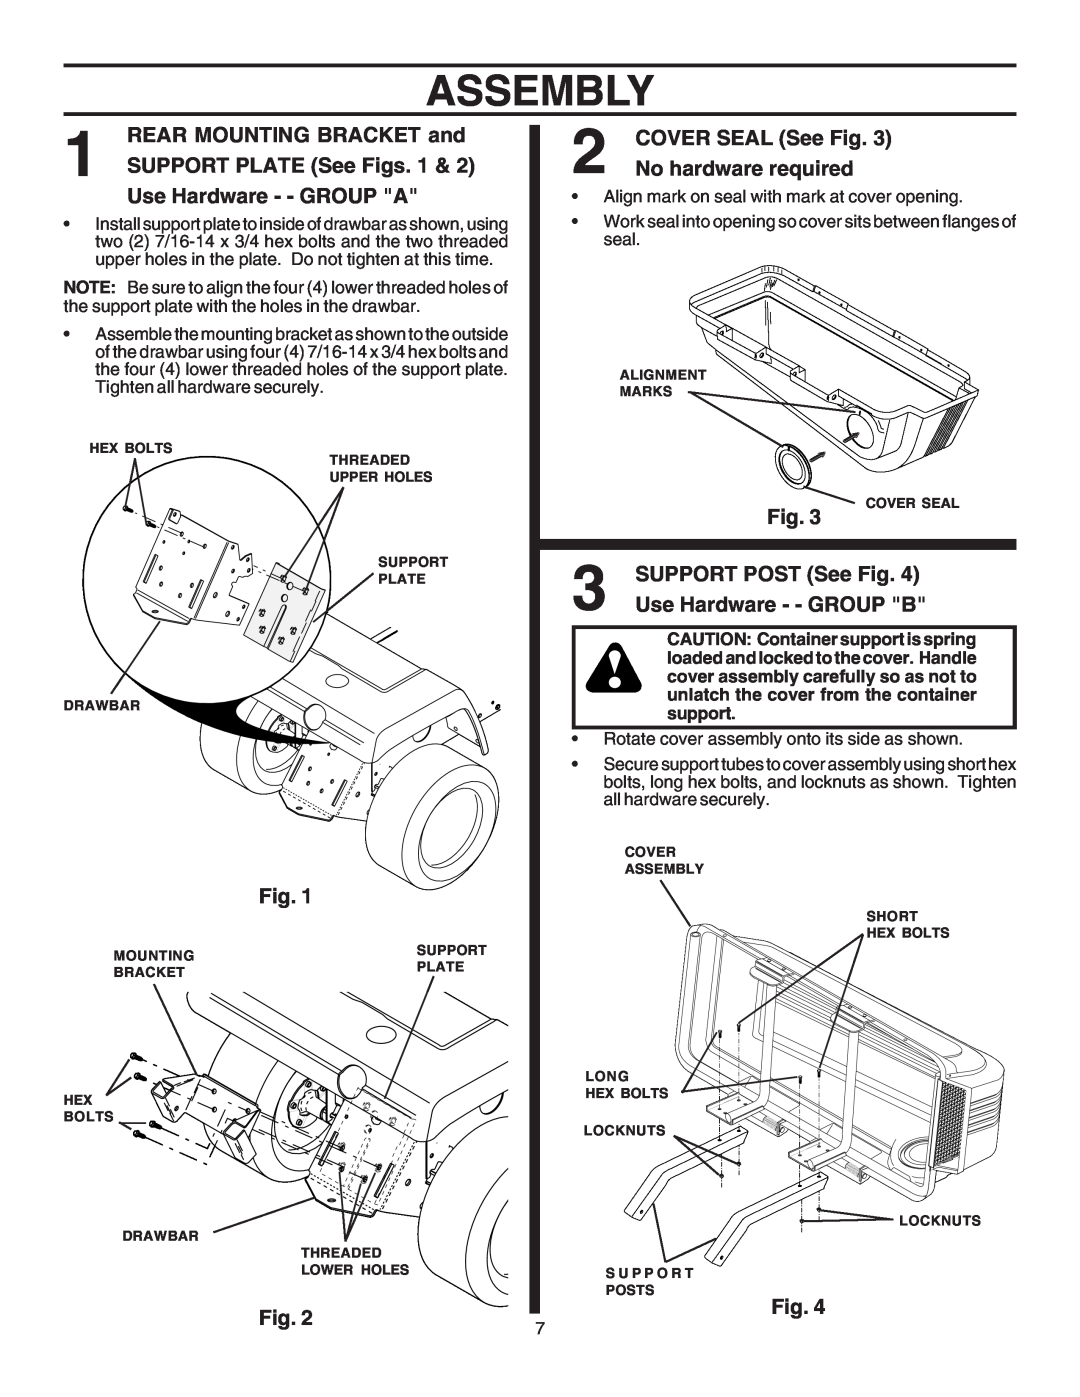 Husqvarna CG46A REAR MOUNTING BRACKET and, SUPPORT PLATE See Figs, Use Hardware - - GROUP A, COVER SEAL See Fig, Assembly 